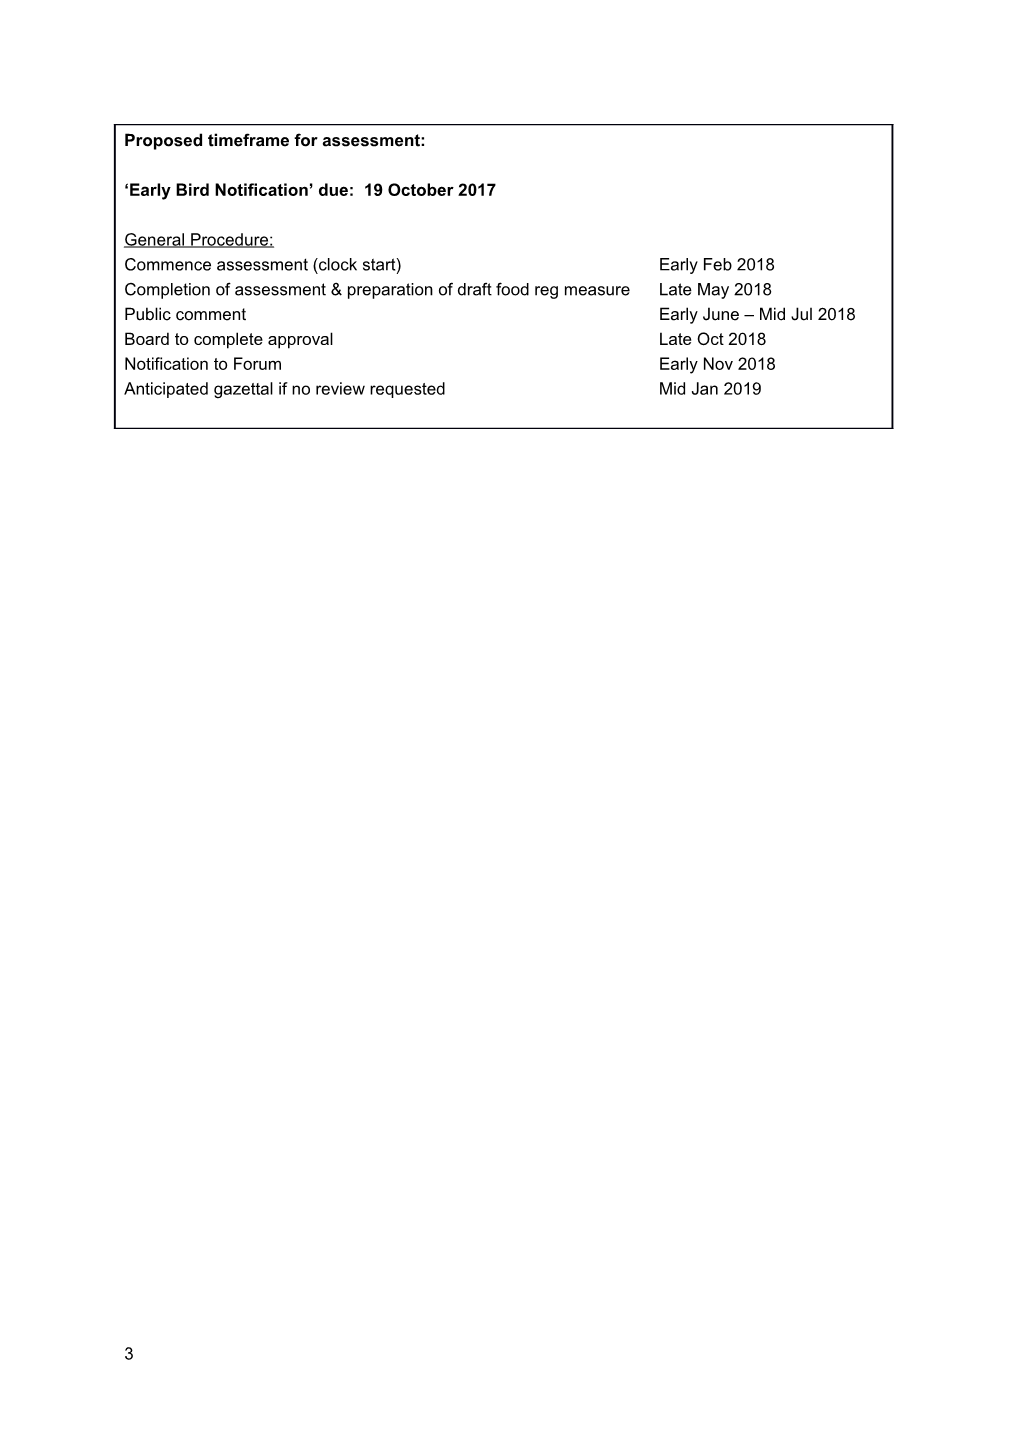 Administrative Assessment Report Application A1153